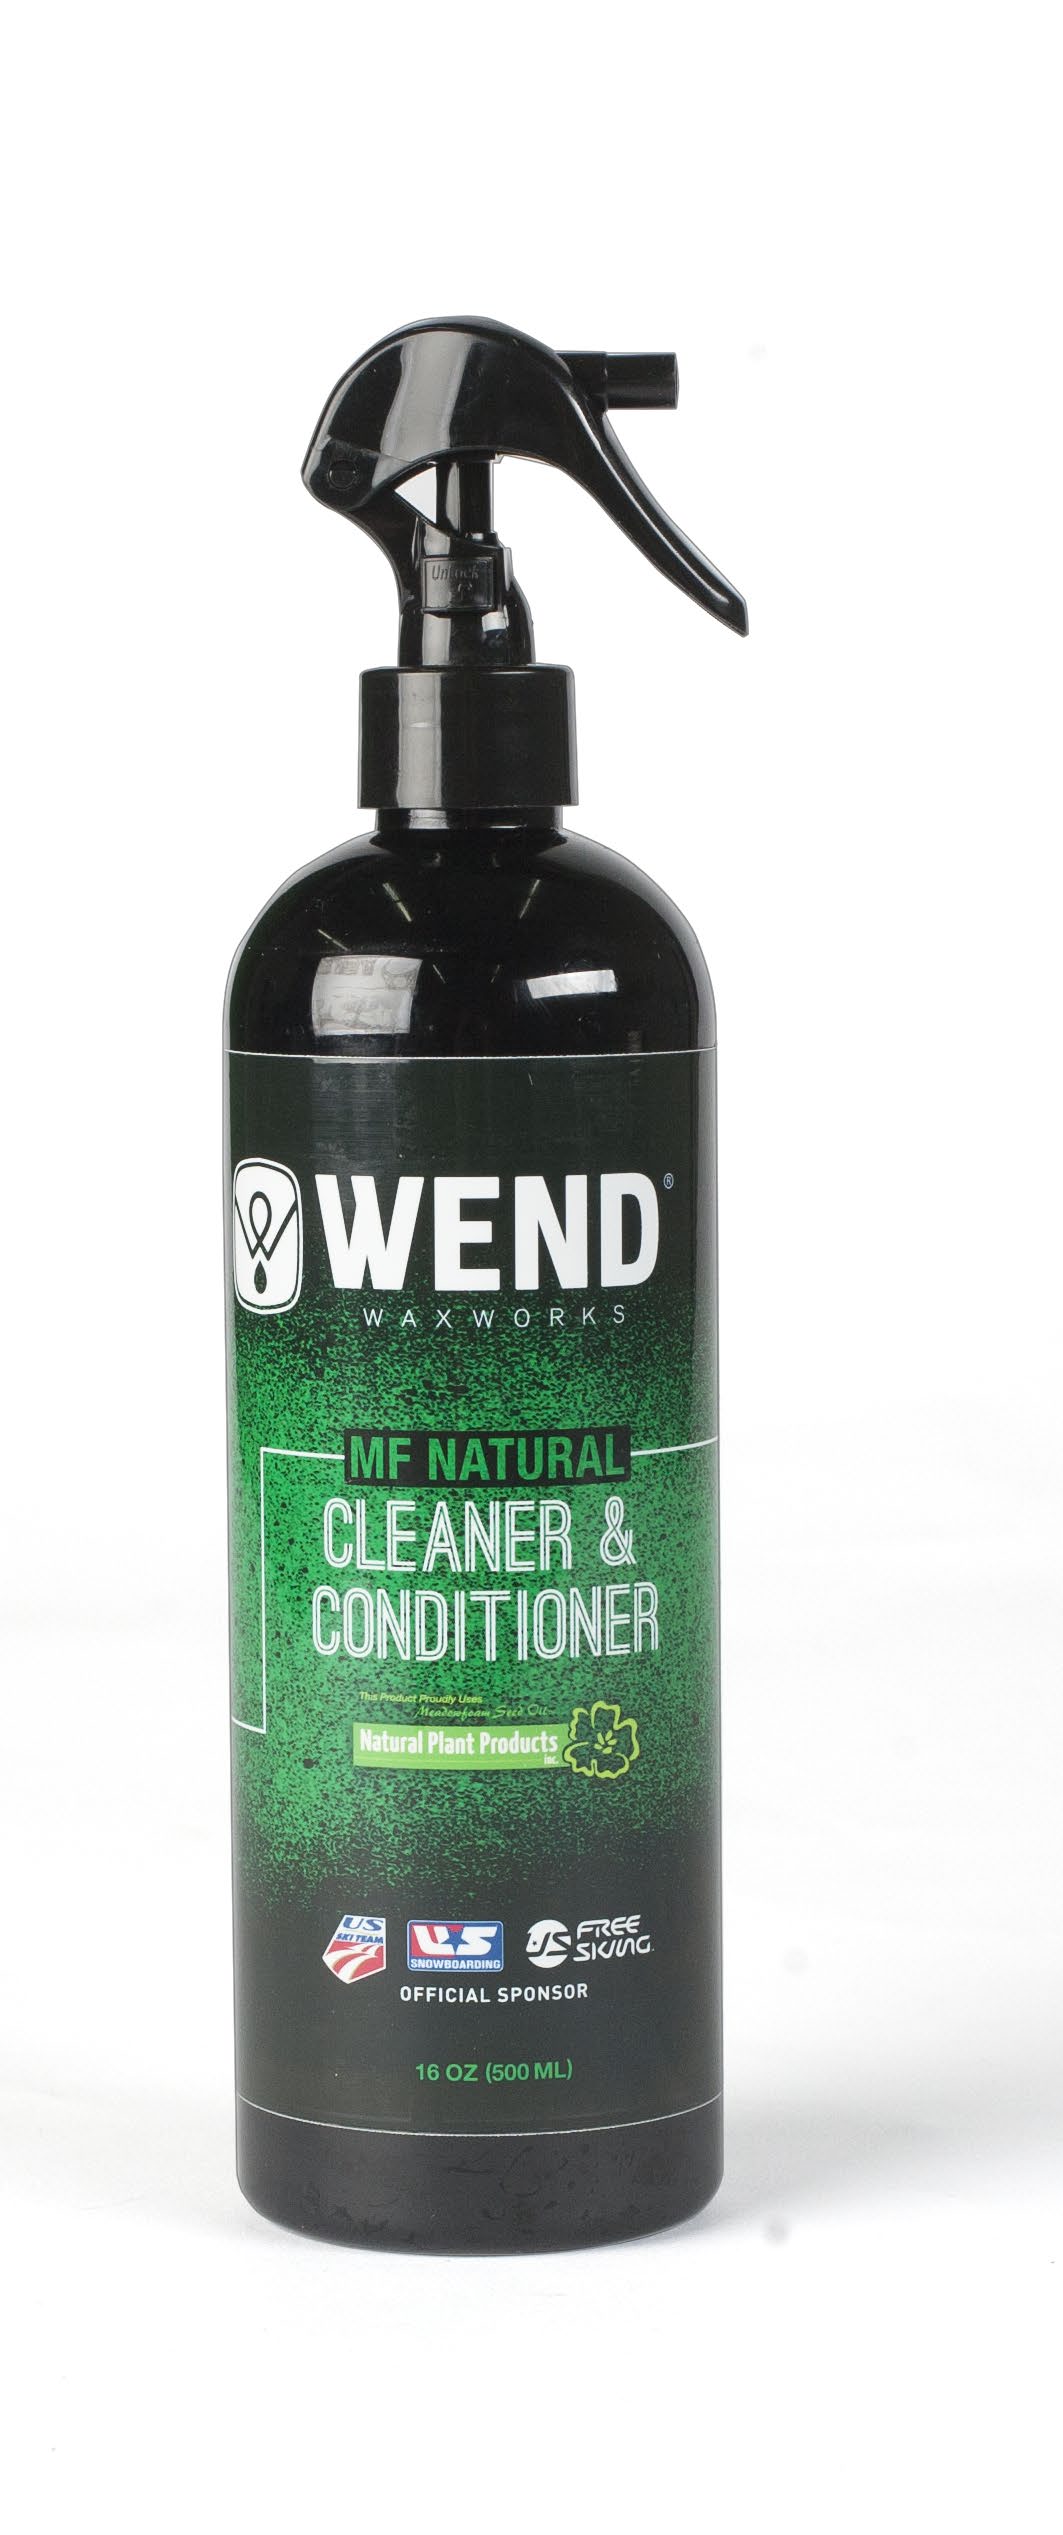 Wend MF Natural Cleaner/Conditioner - 16oz - 500ml